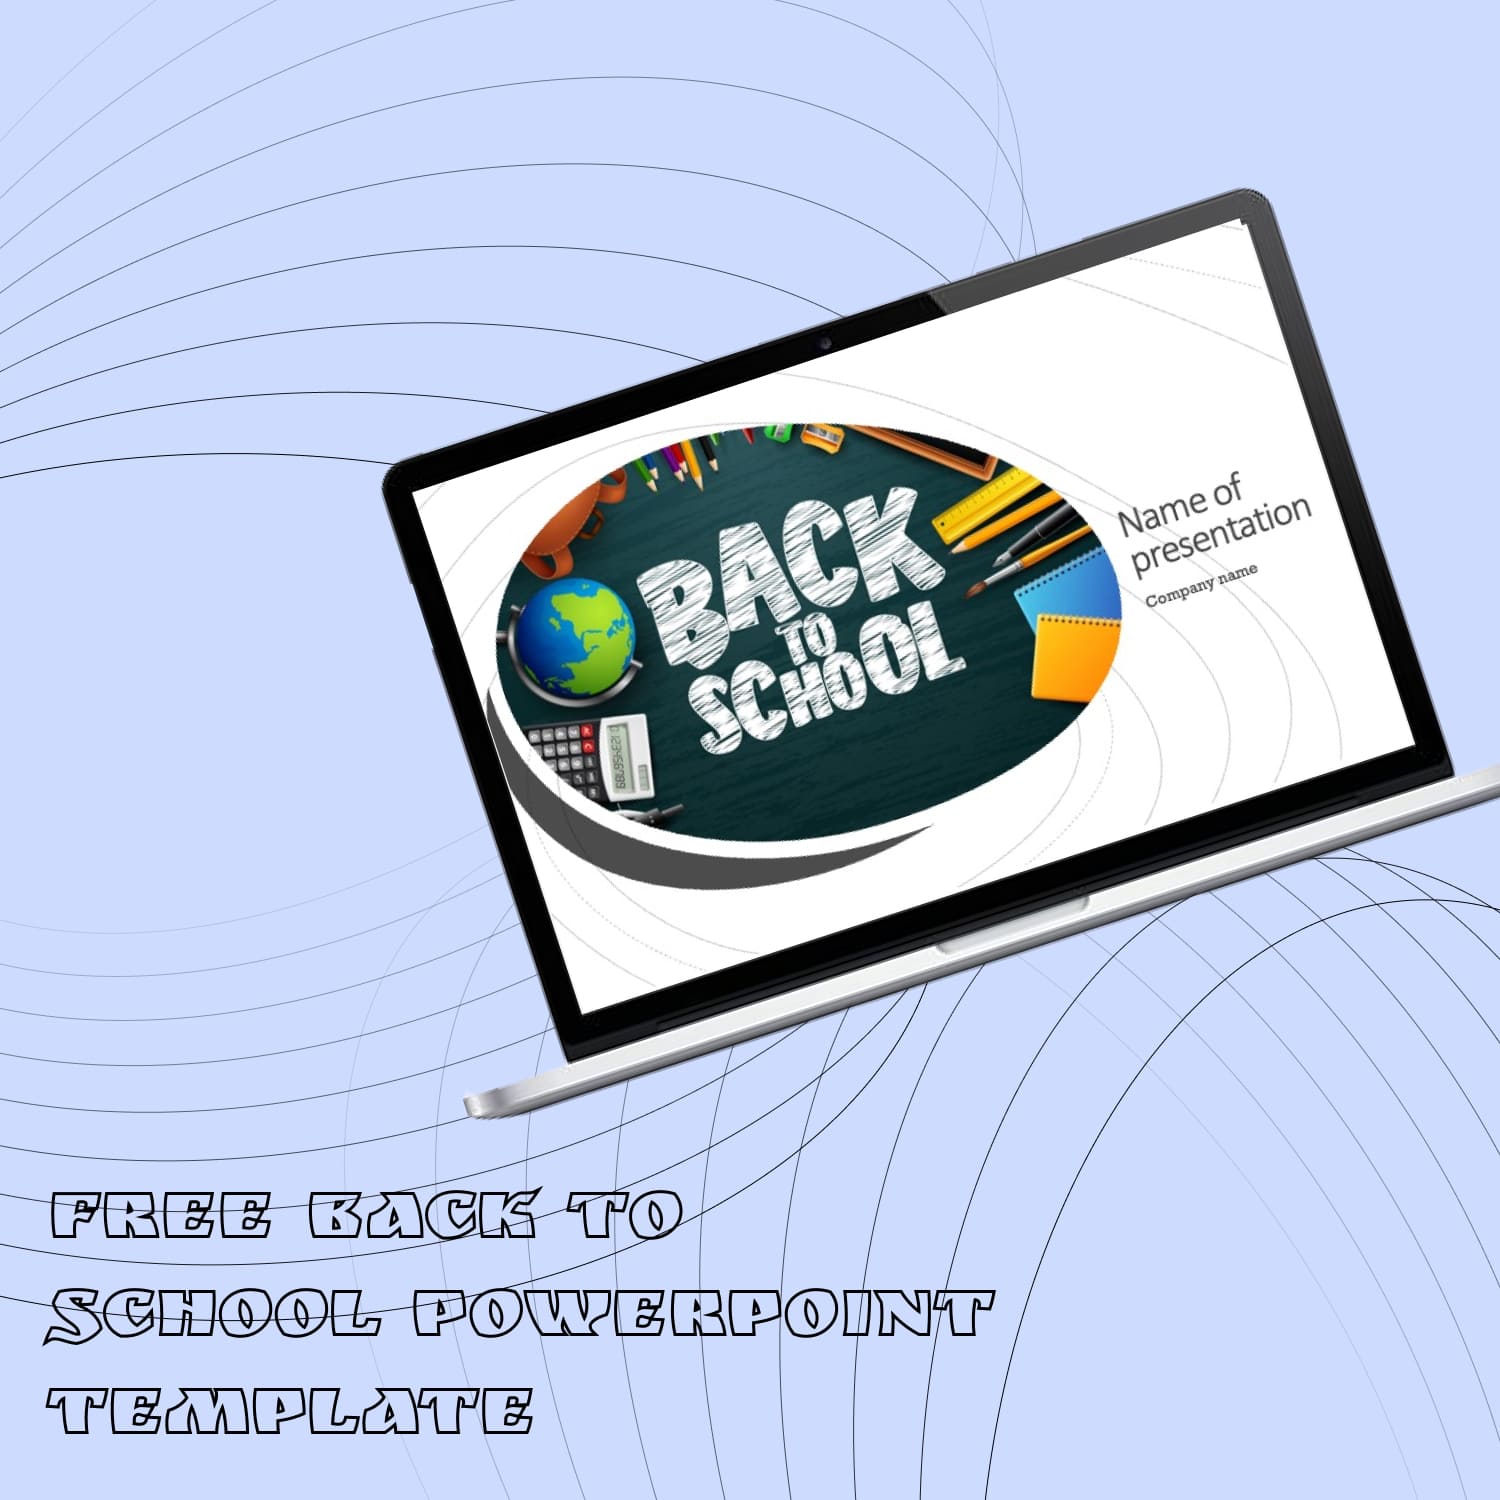 Images with Back To School Powerpoint Template.